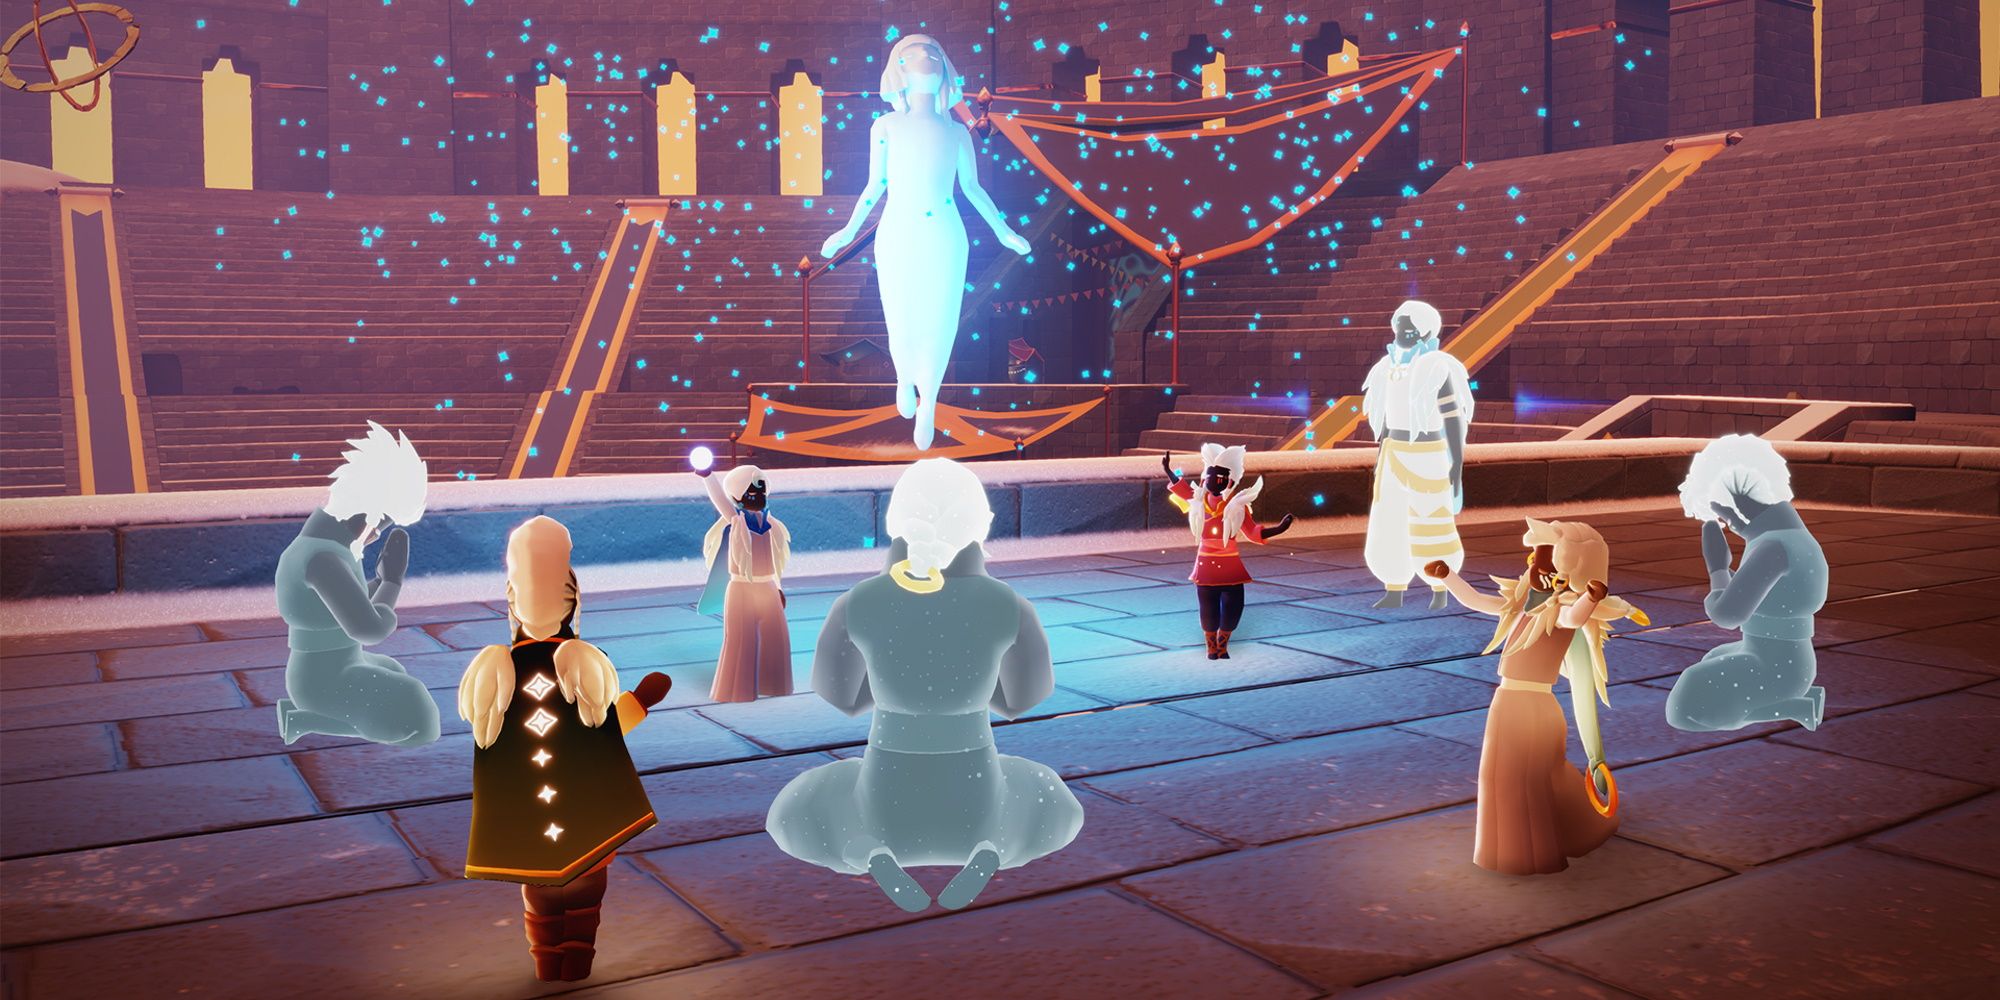 Sky Children Of The Light To Connect 4,000 Players In Aurora Virtual